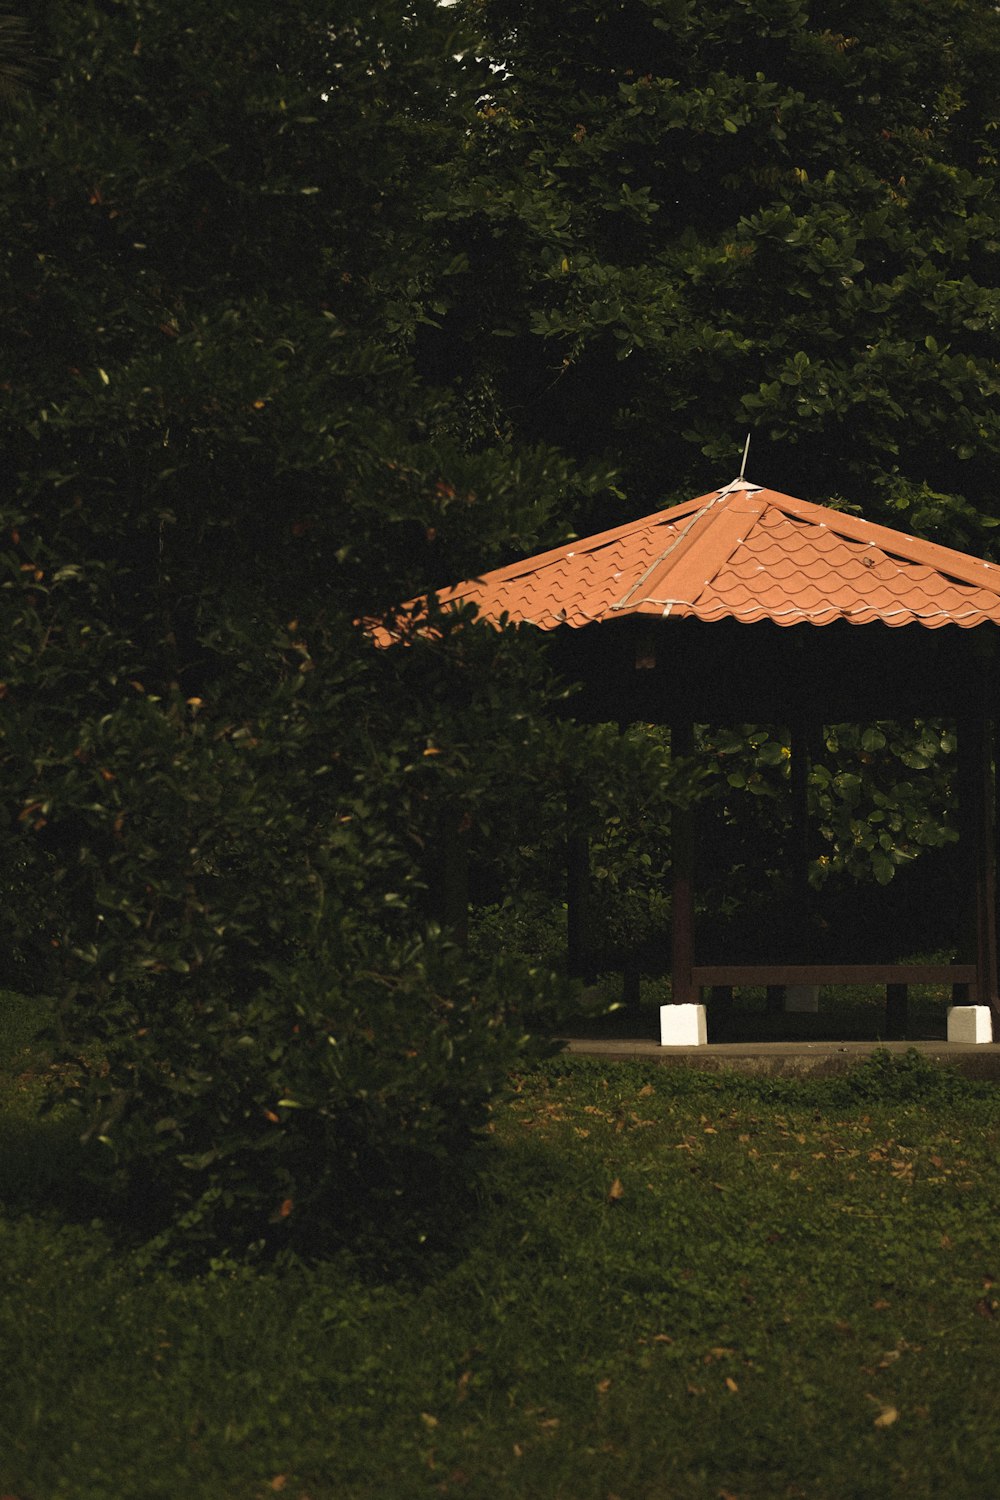 a gazebo in the middle of a grassy area surrounded by trees